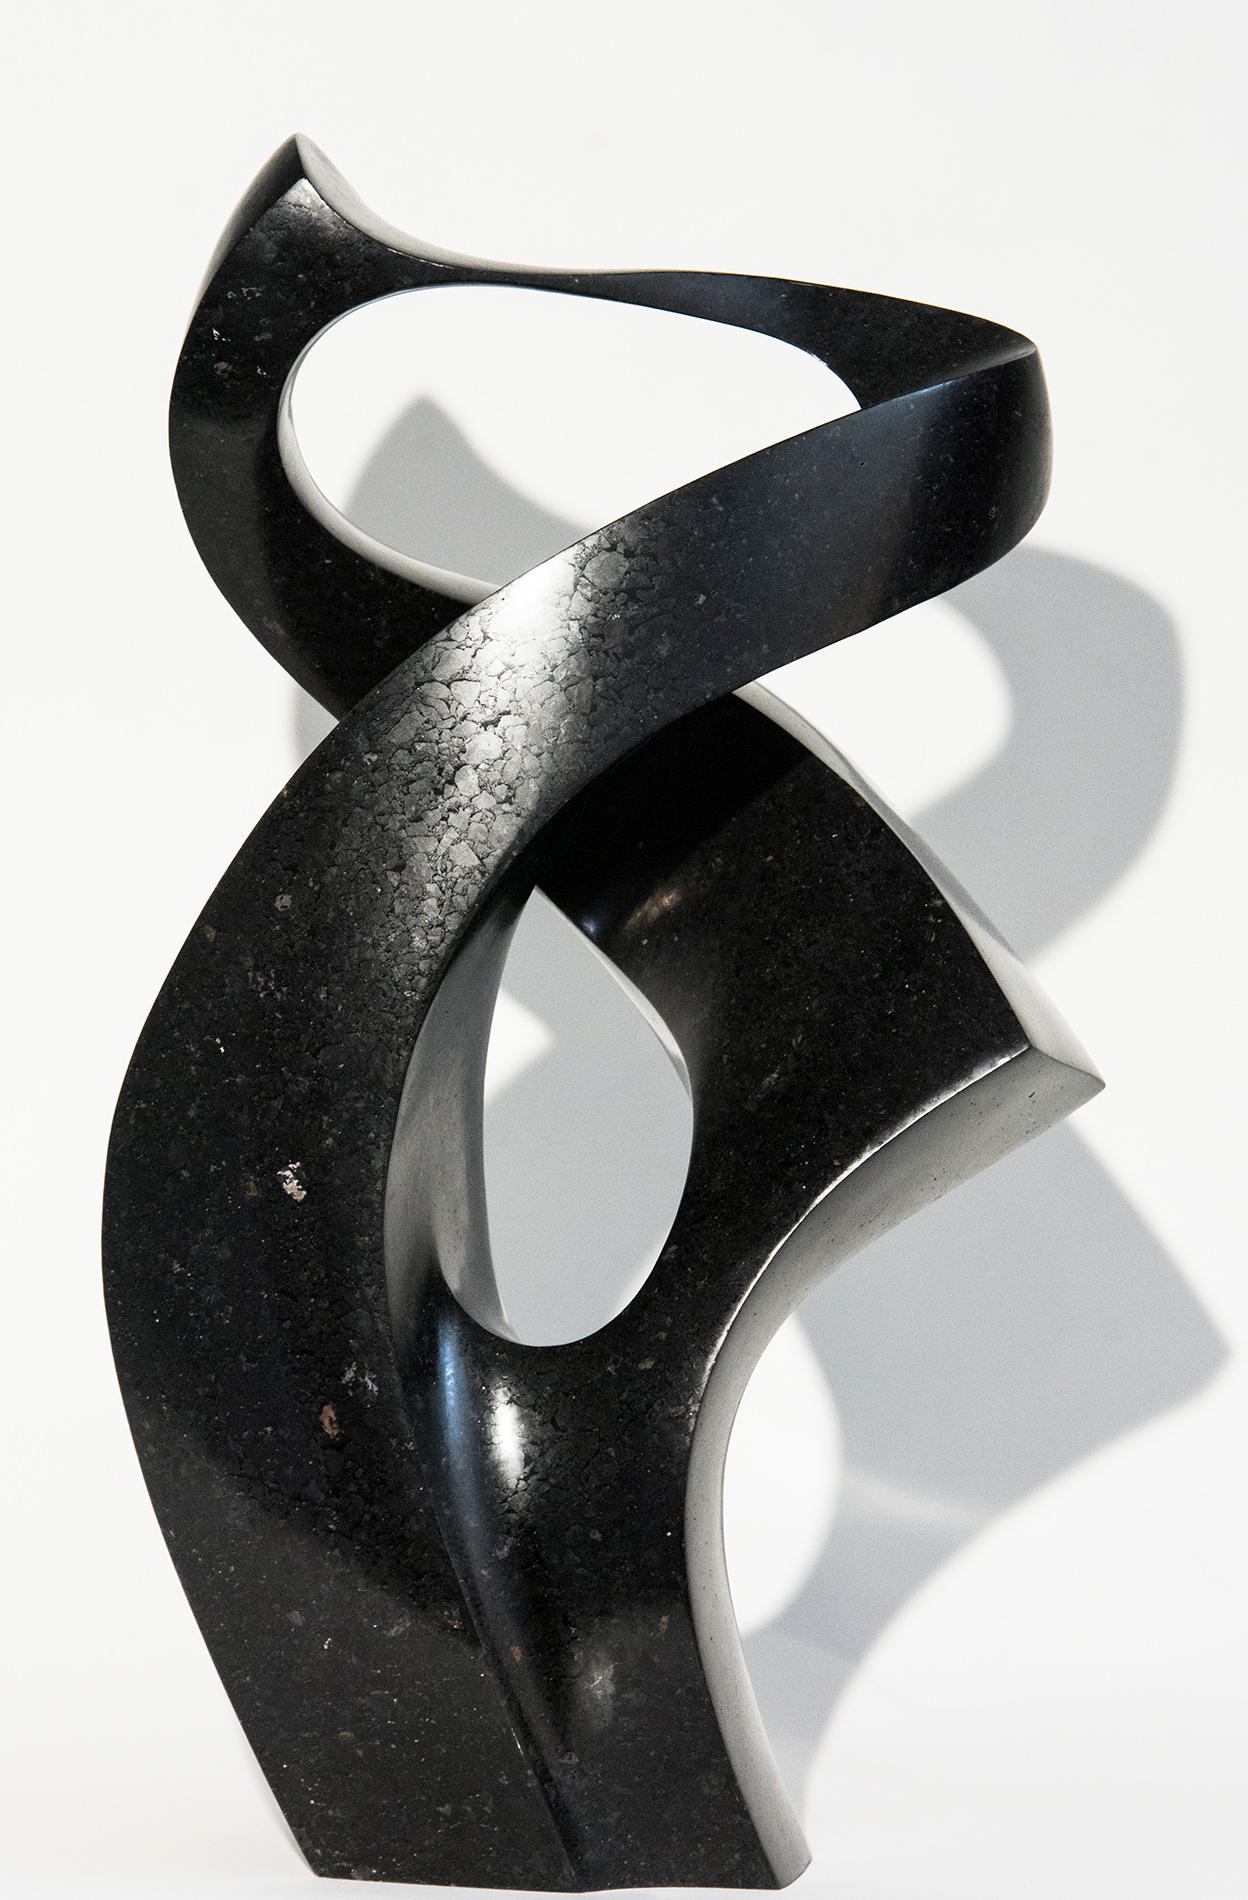 Embrace 3/50 - dark, smooth, polished, abstract, black granite sculpture - Contemporary Sculpture by Jeremy Guy